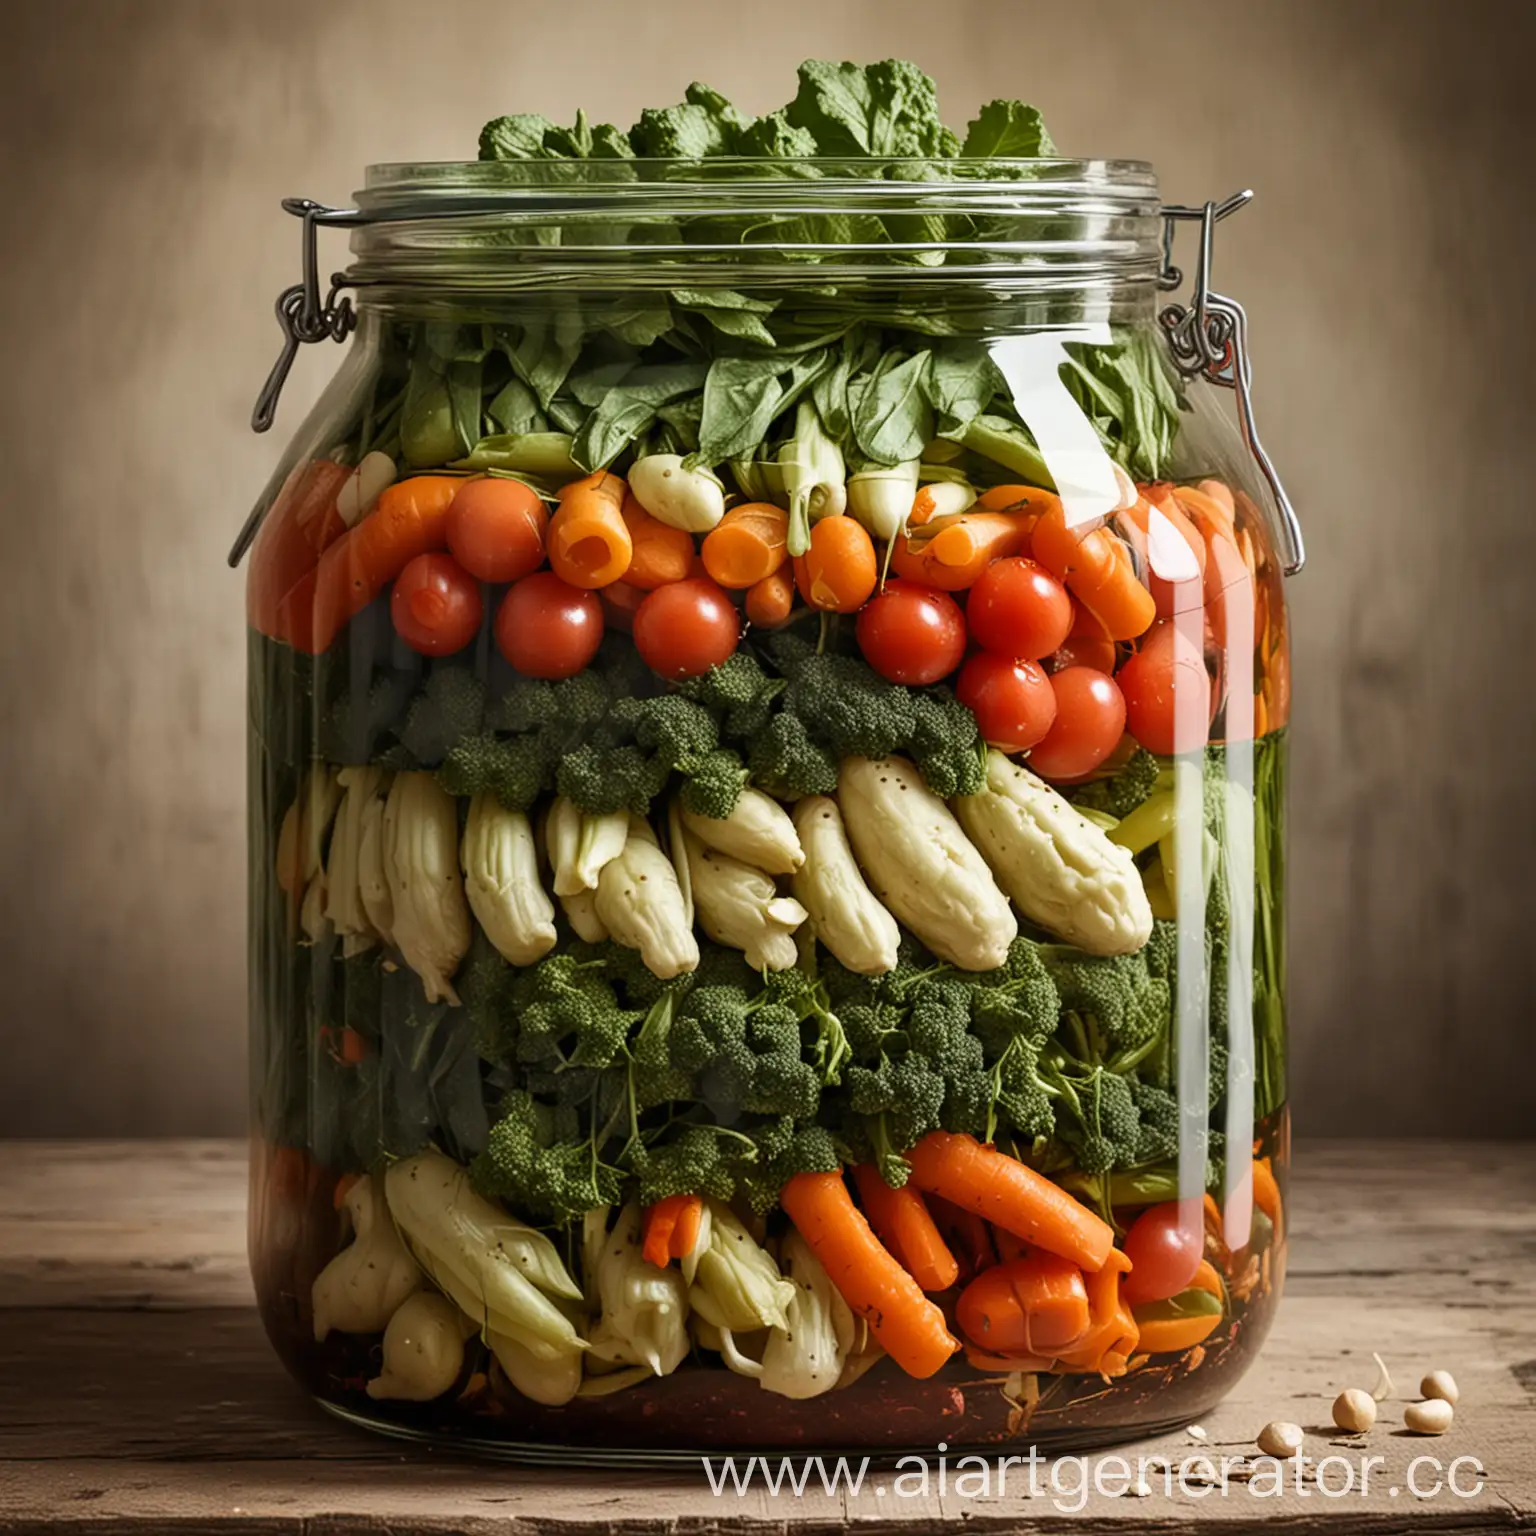 Colorful-Fermentation-of-Vegetables-Natural-Process-and-Vibrant-Tones